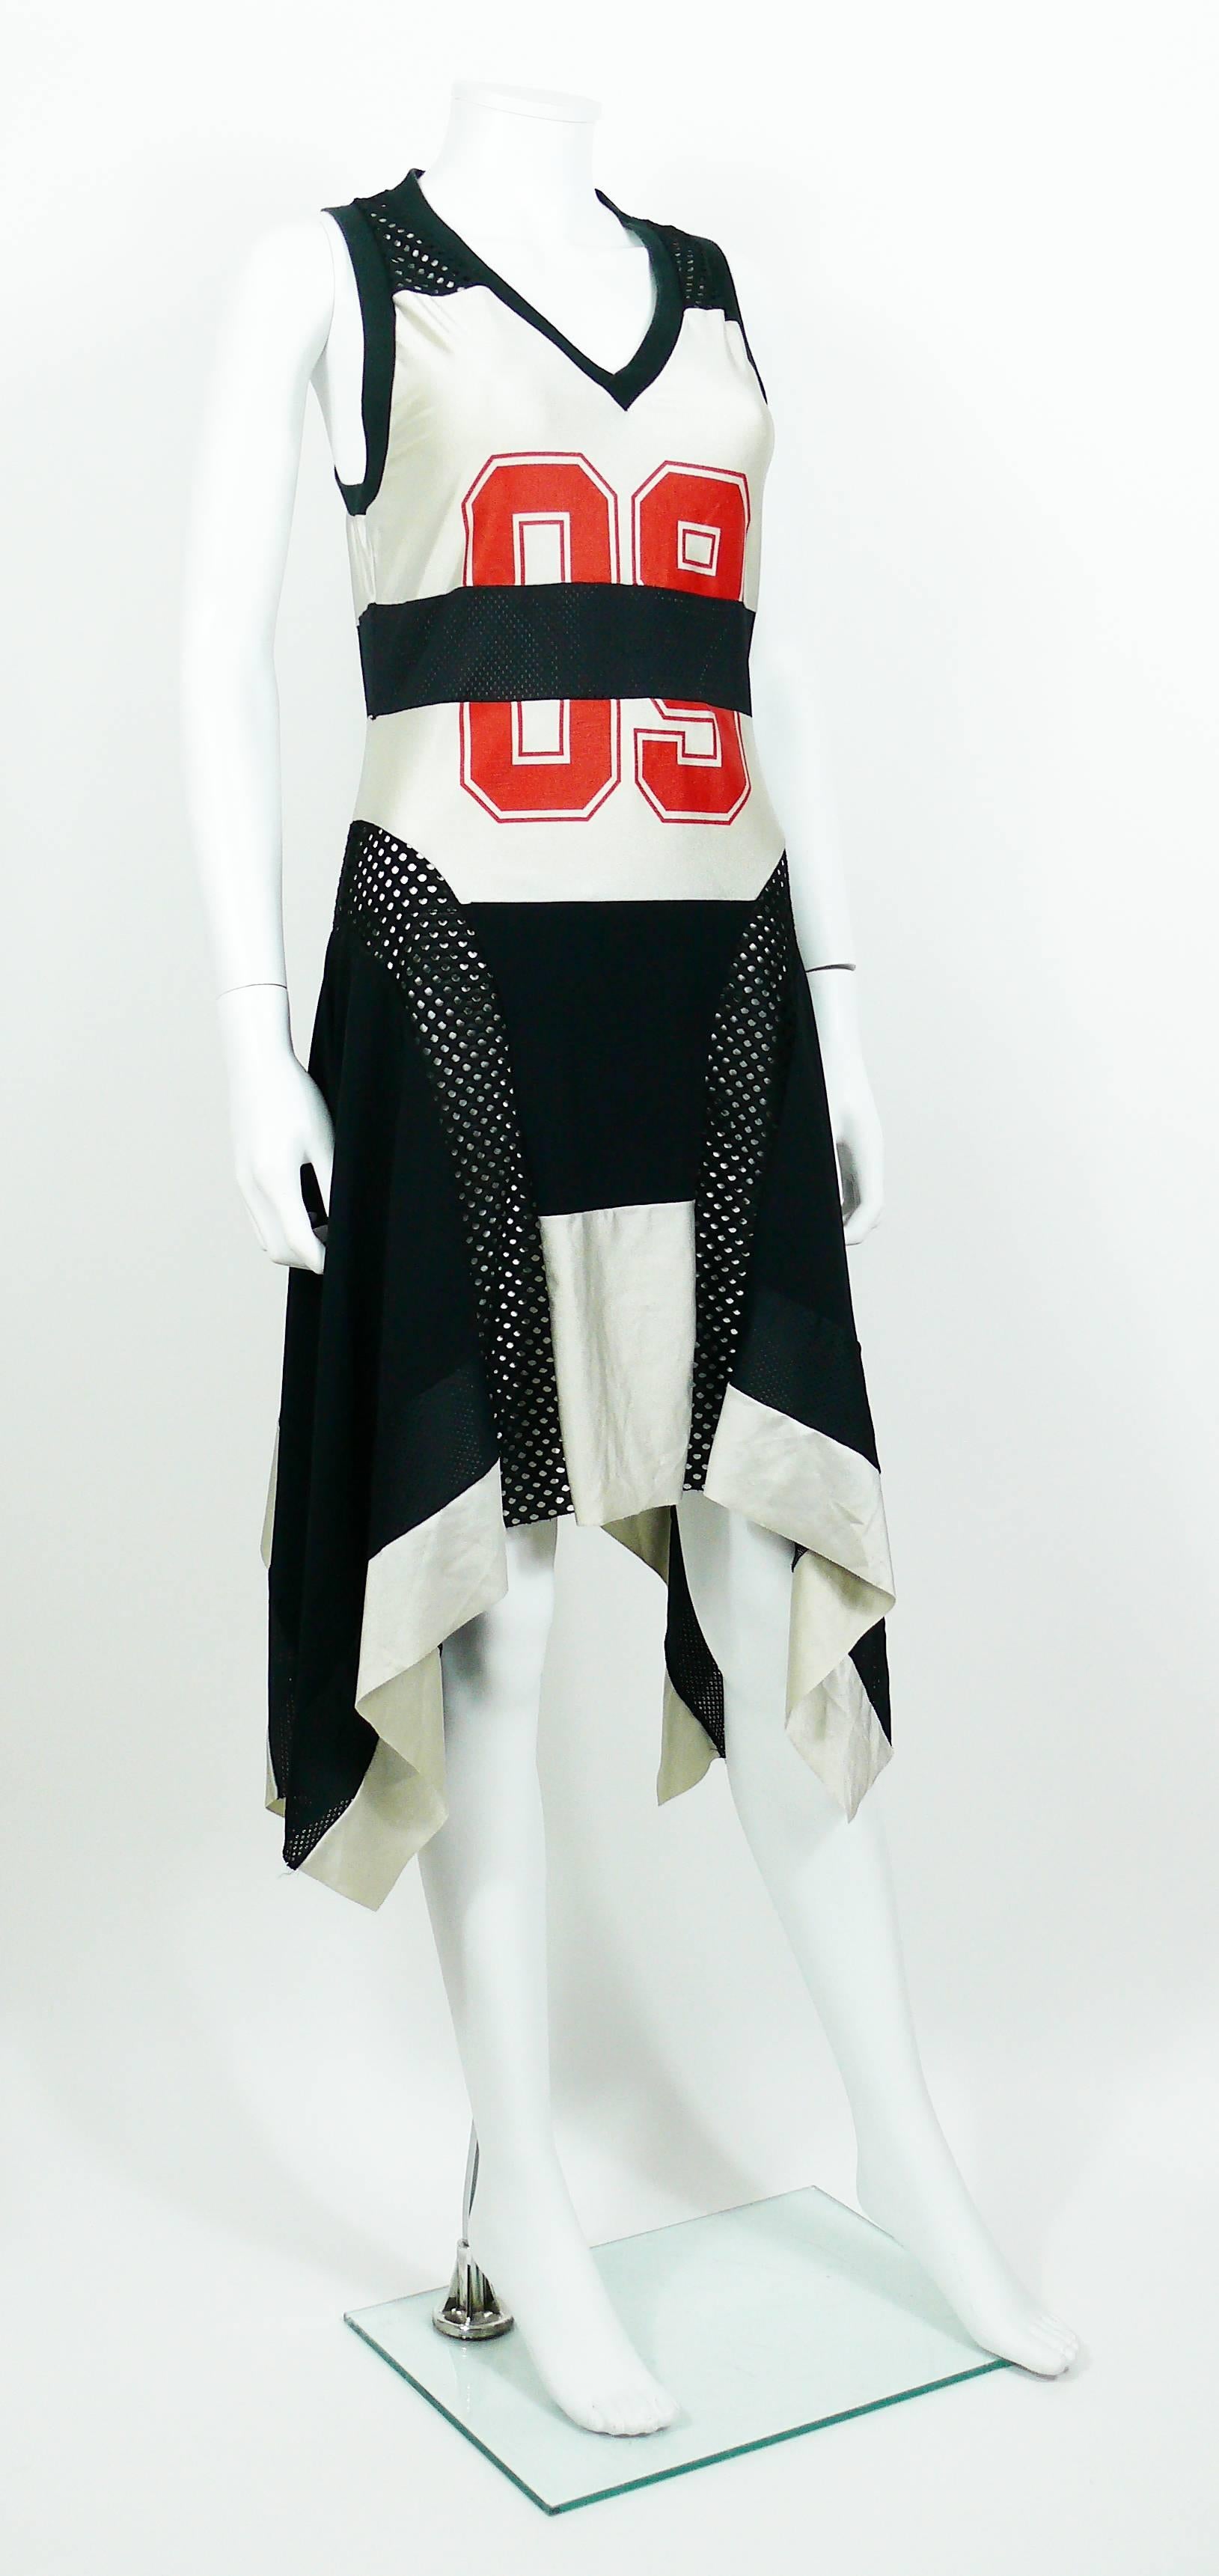 JEAN PAUL GAULTIER black and grey colour block basketball jersey asymetrical dress.

This dress features :
- V-neck.
- Racer back.
- Openwork mesh paneling to the front and rear.
- Large red 